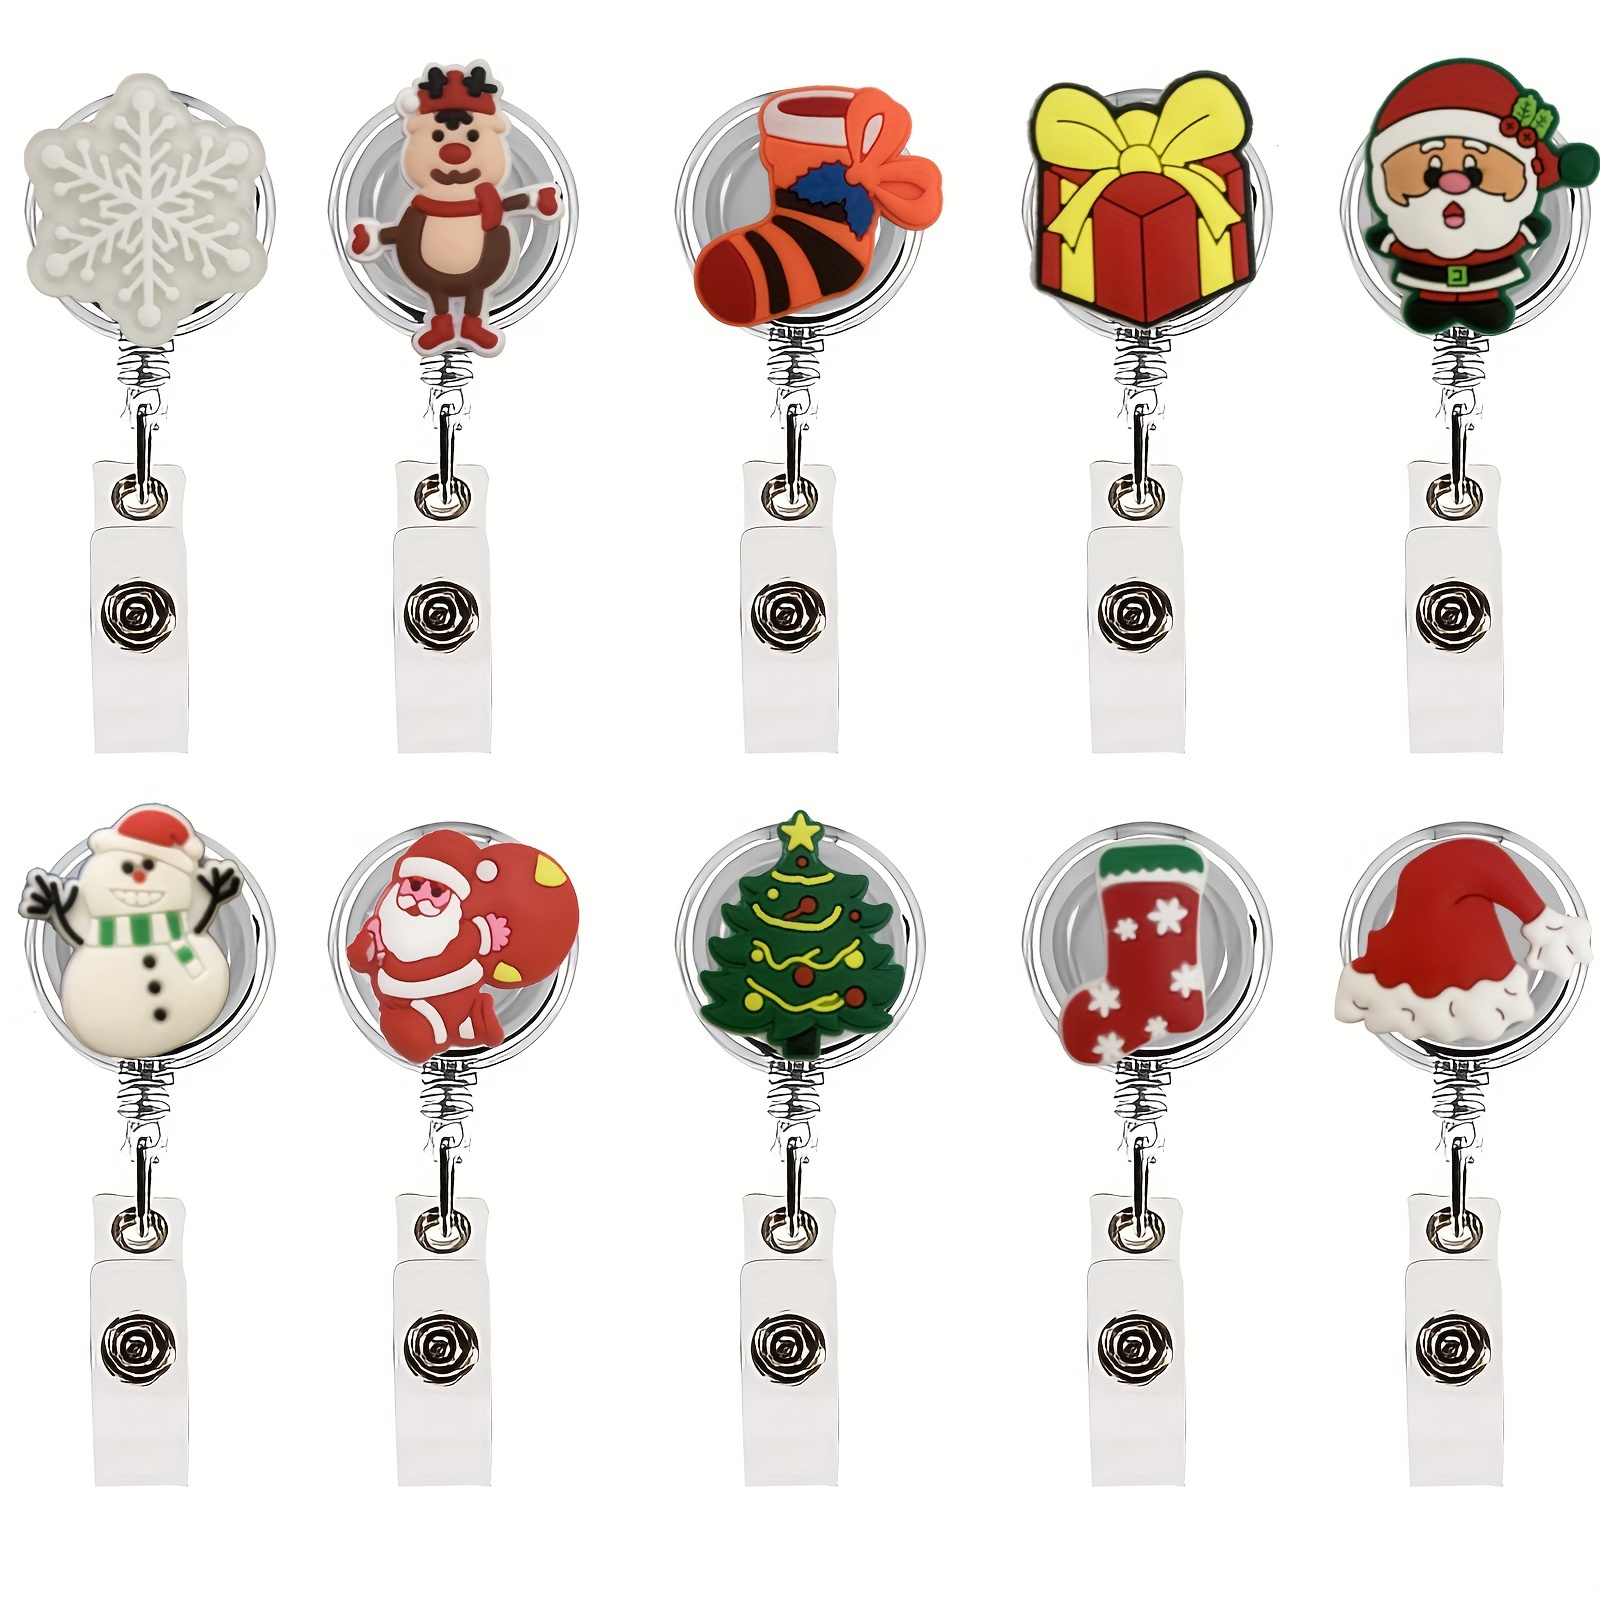  9 Pieces Christmas Badge Reel Holder Retractable Nurse Badge  Reel Bling Glitter Holiday Badge Reels Cute Acrylic Id Name Badge Holder  with Alligator Clip for Office Nurses Doctors (Cute Style)